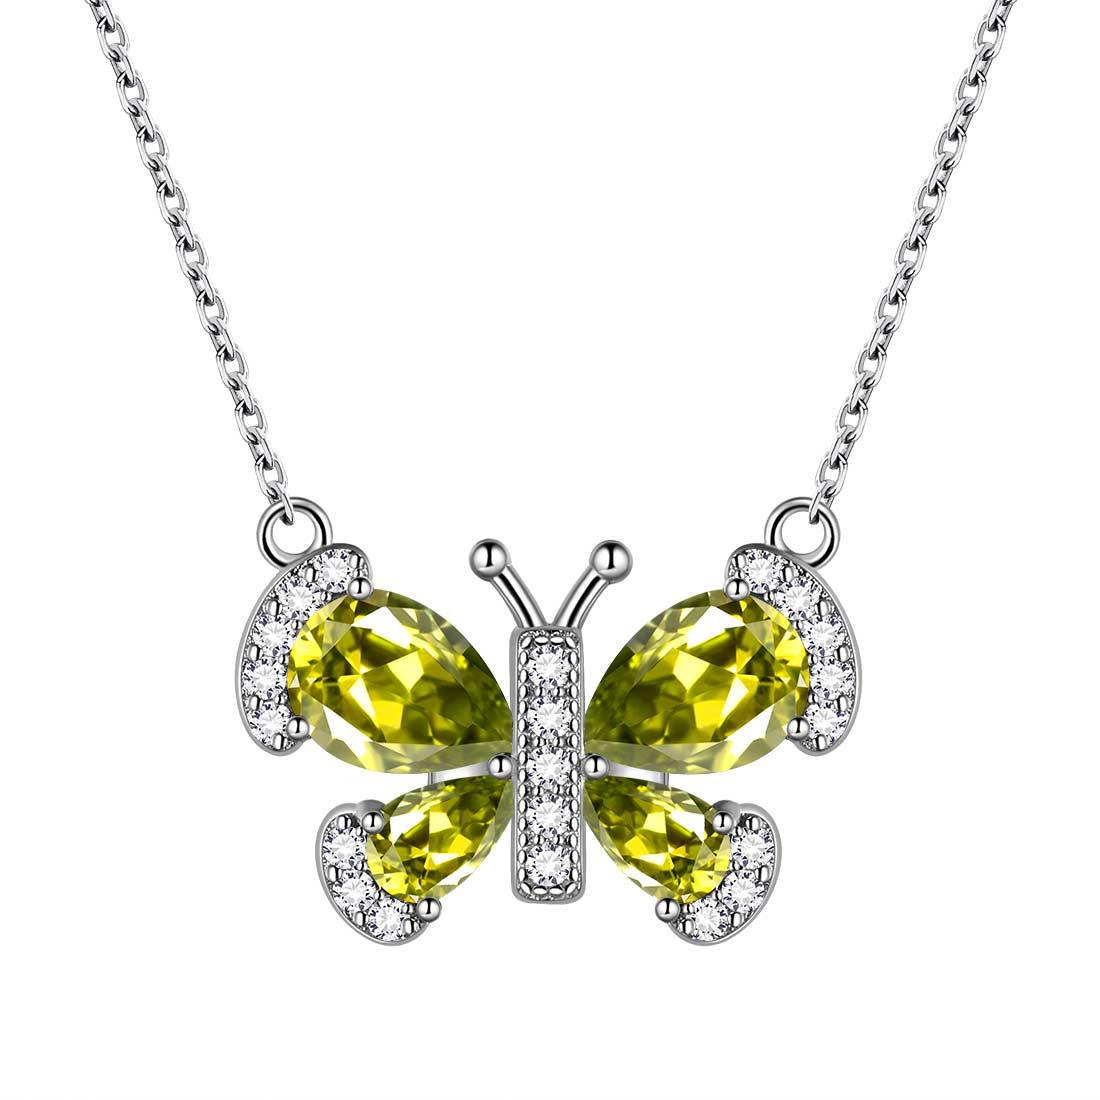 Butterfly Necklace Birthstone August Peridot Pendant - Necklaces - Aurora Tears